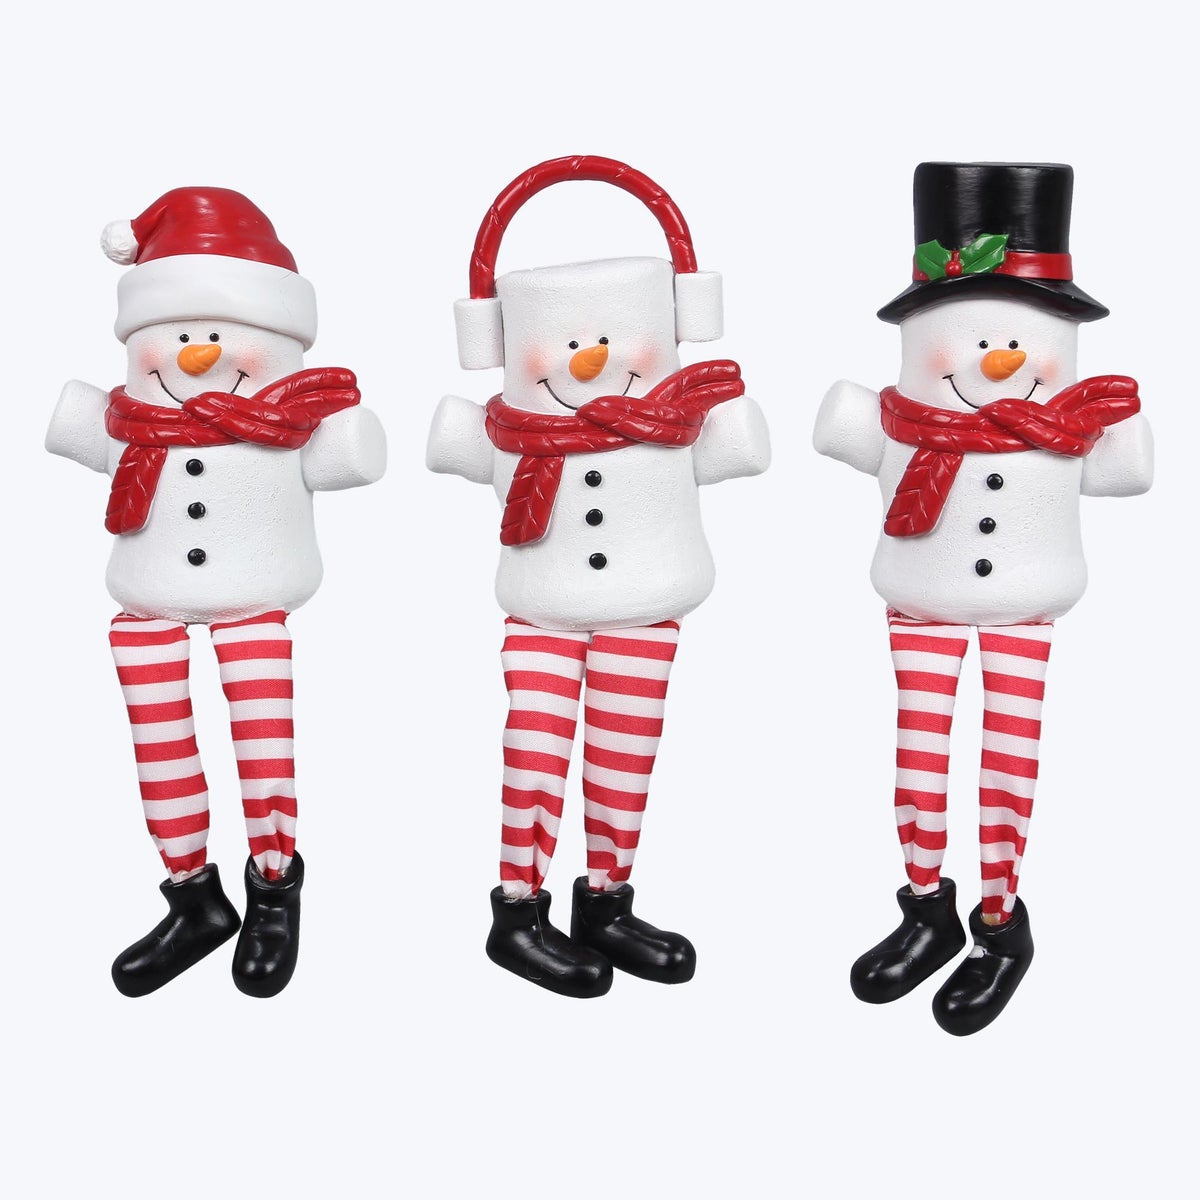 Resin Cocoa and Cookies Snowman Shelf Sitter Christmas Ornaments, 3 Ast